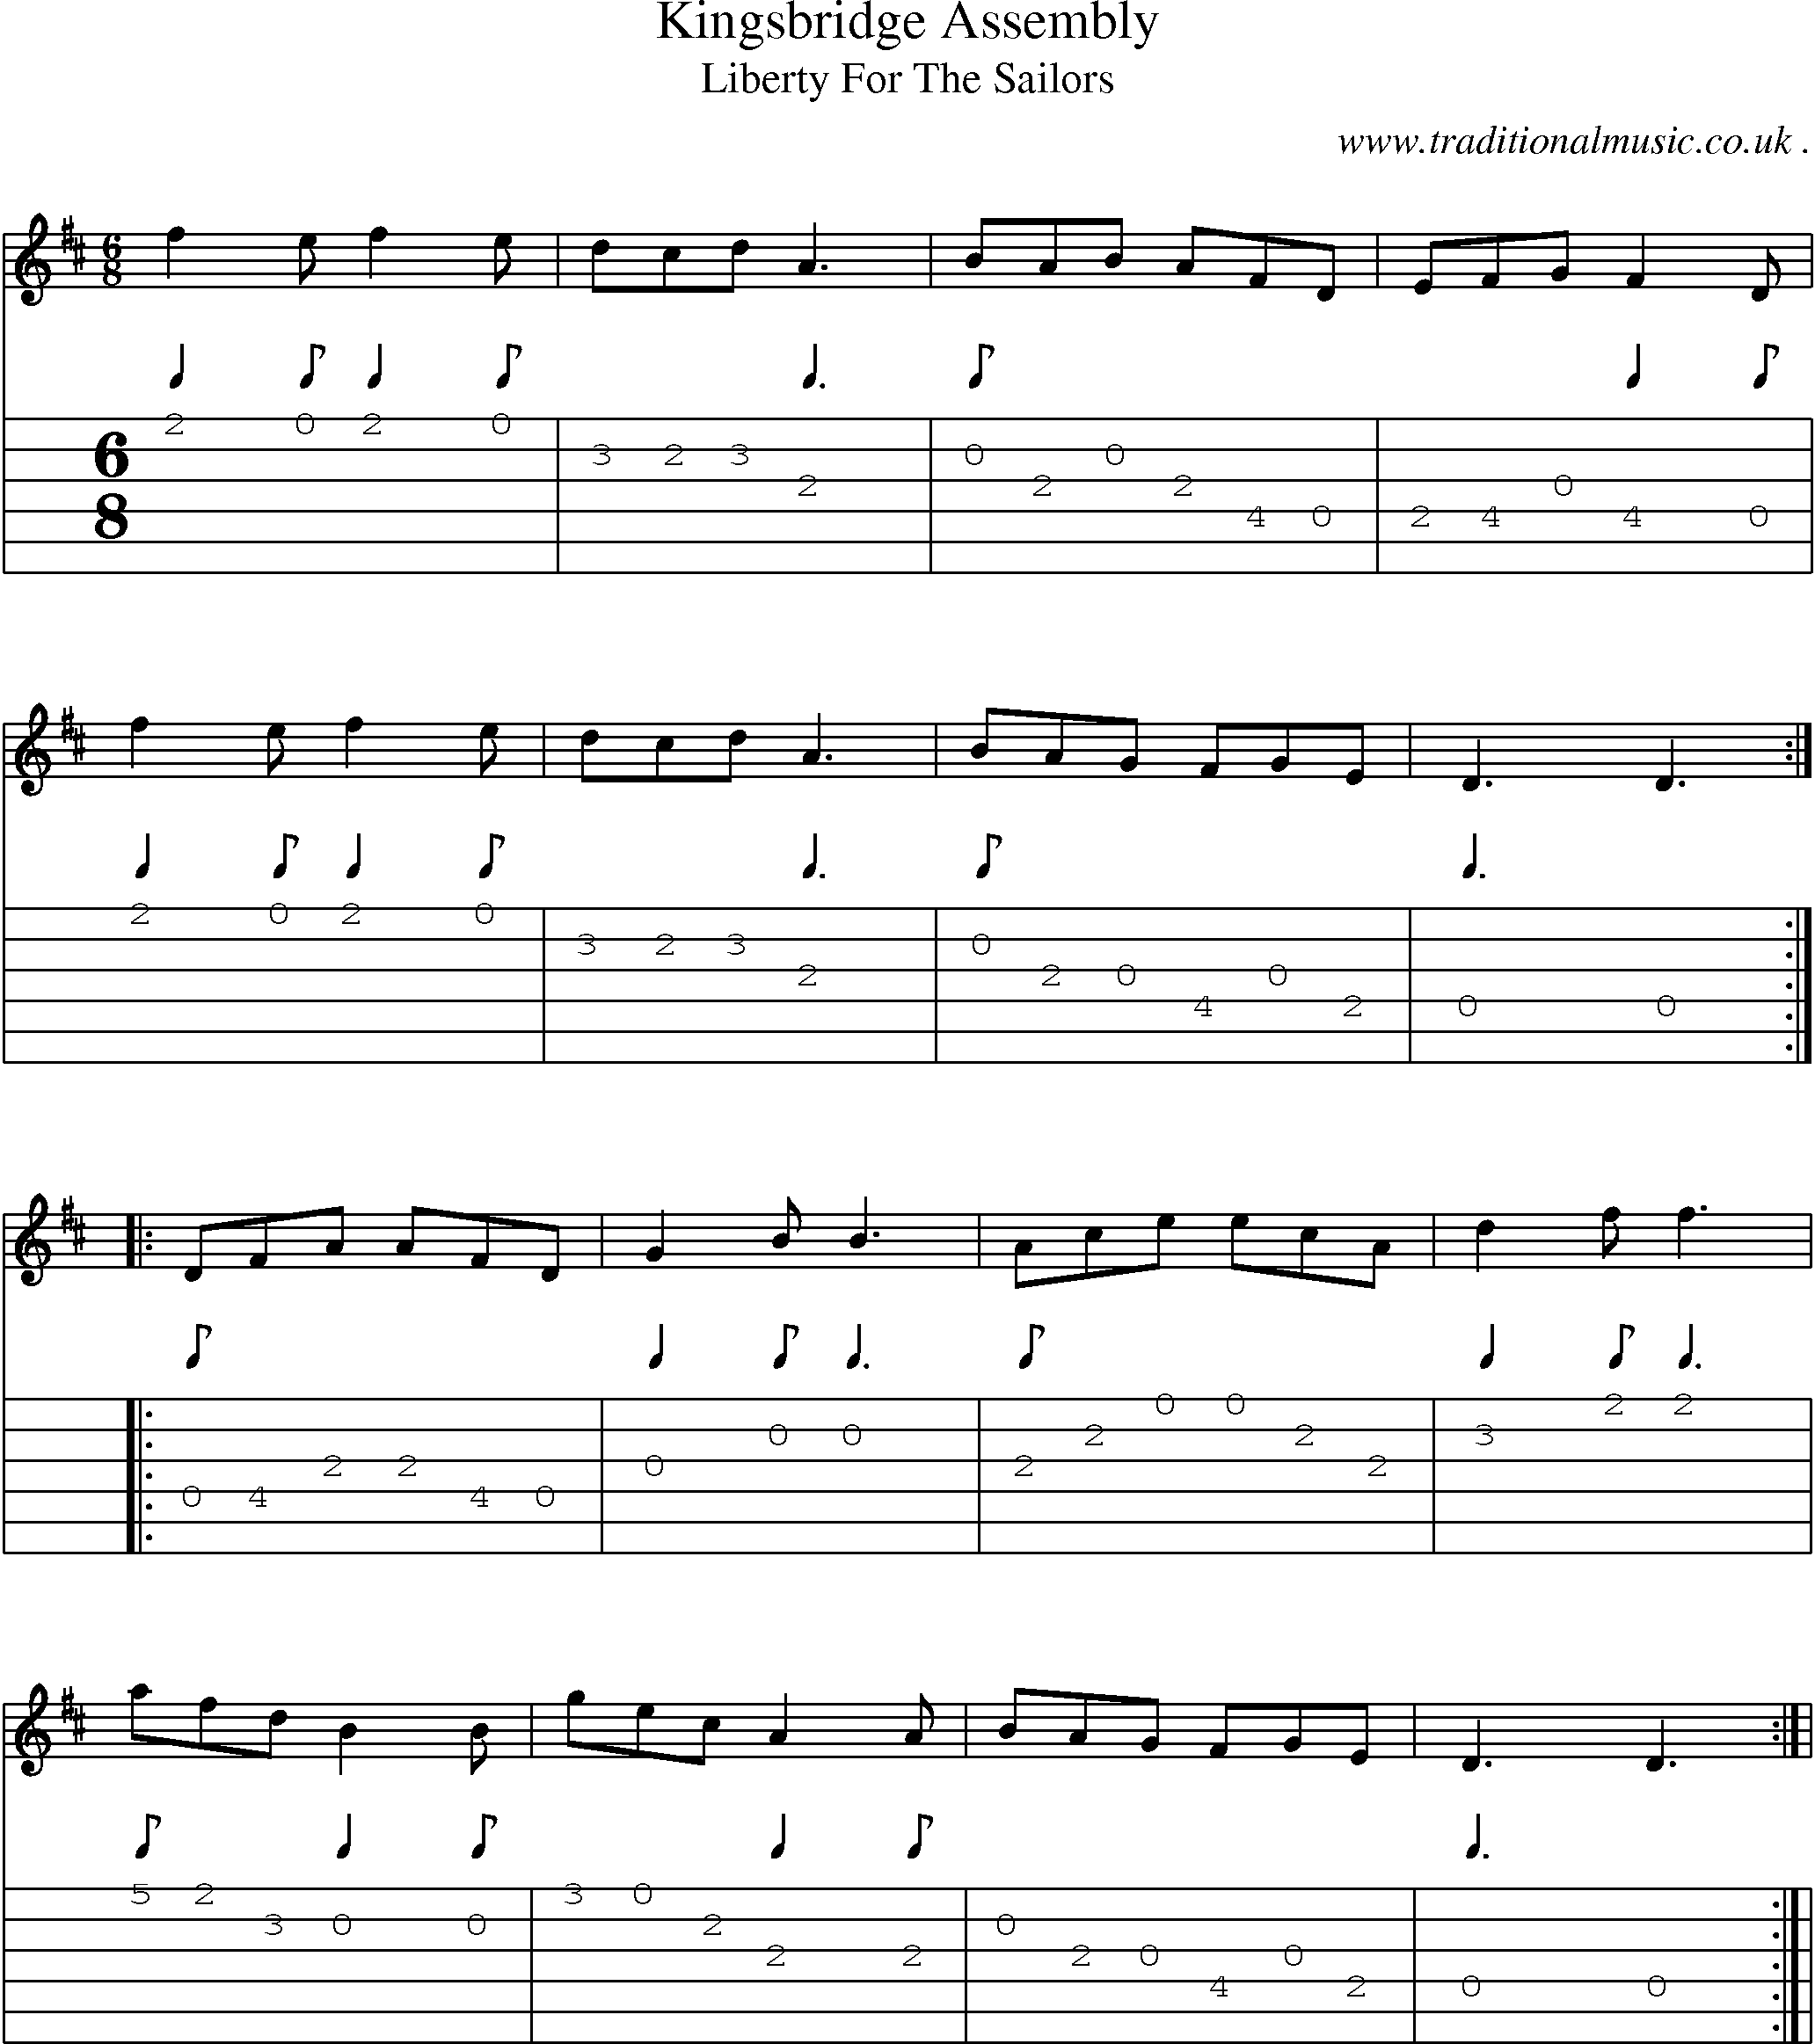 Sheet-Music and Guitar Tabs for Kingsbridge Assembly